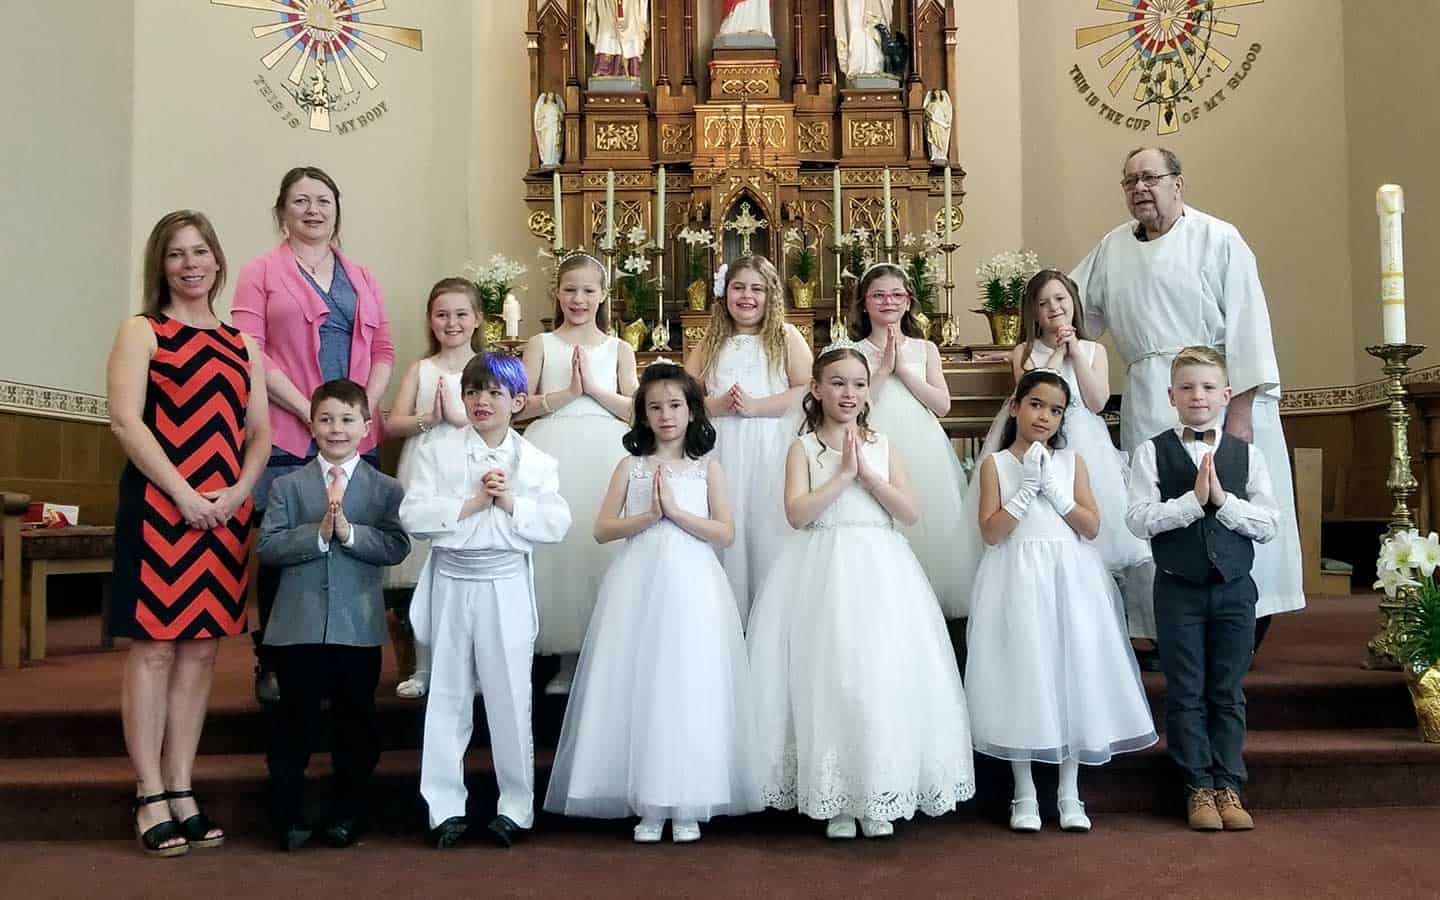                      First communion for St. Boniface students                             
                     